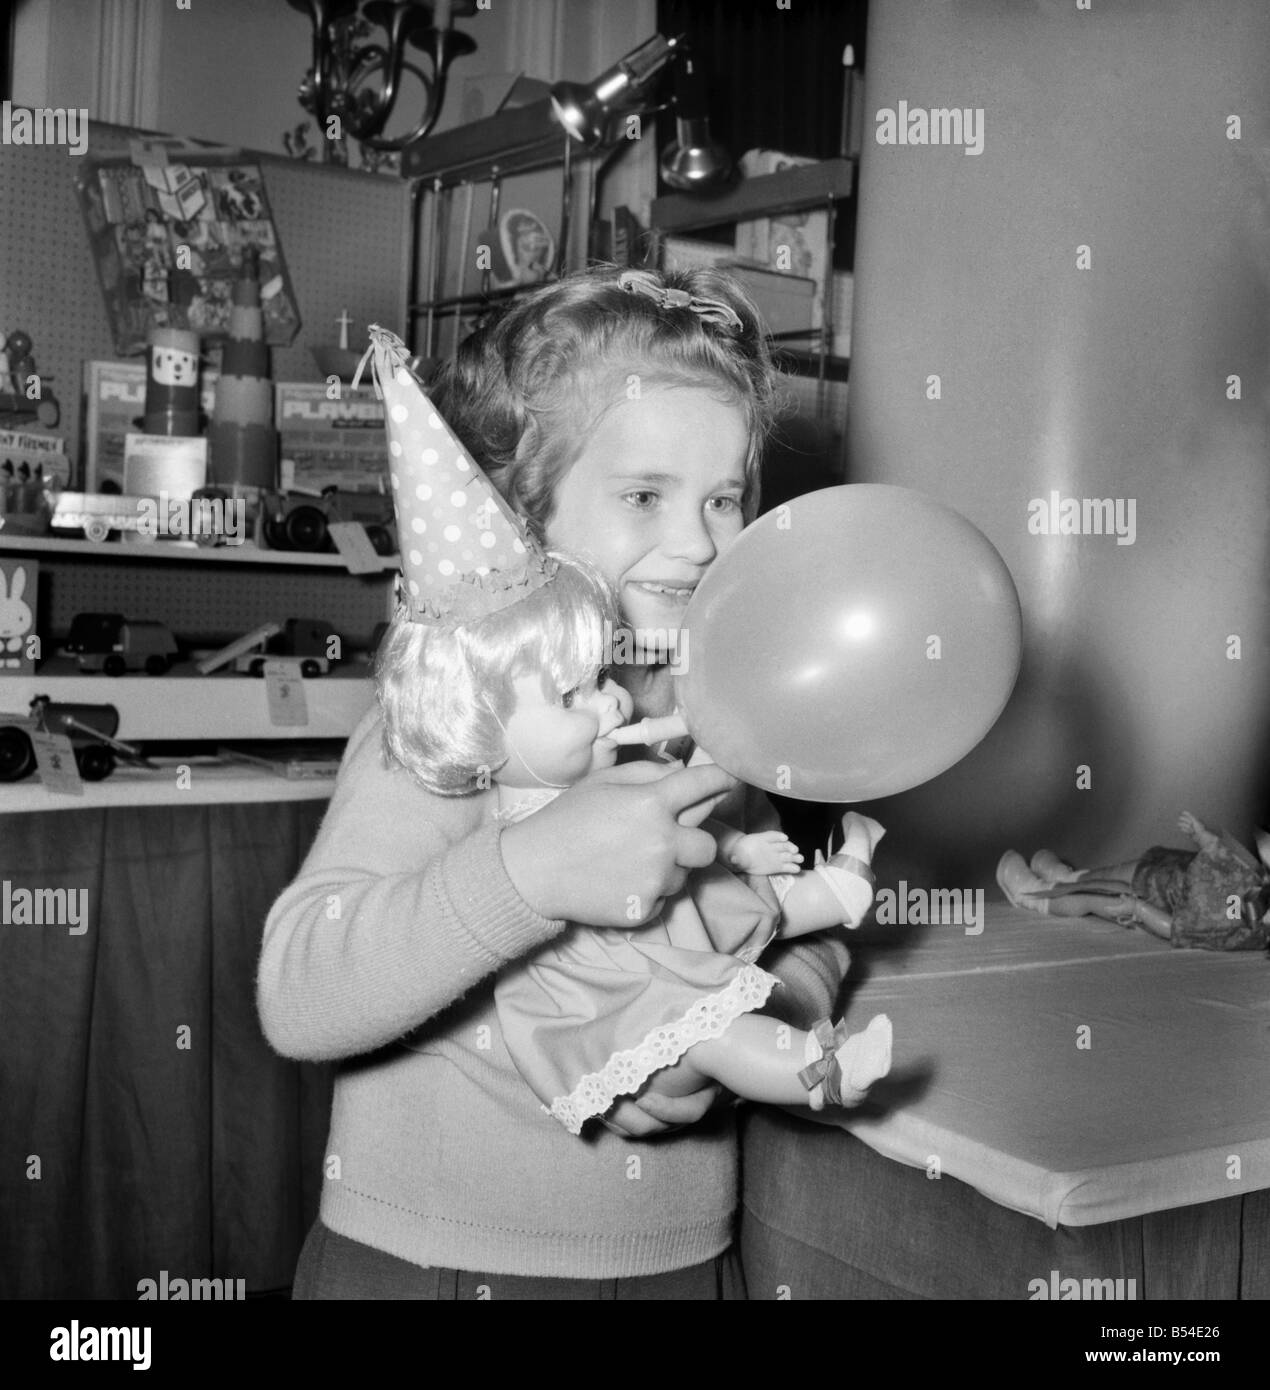 Children. Toys: The British Toy Manufacturers Association held a pre-Christmas display of new British Toys at the Waldorf Hotel, W.C.2. November 1969 Z10631-004 Stock Photo